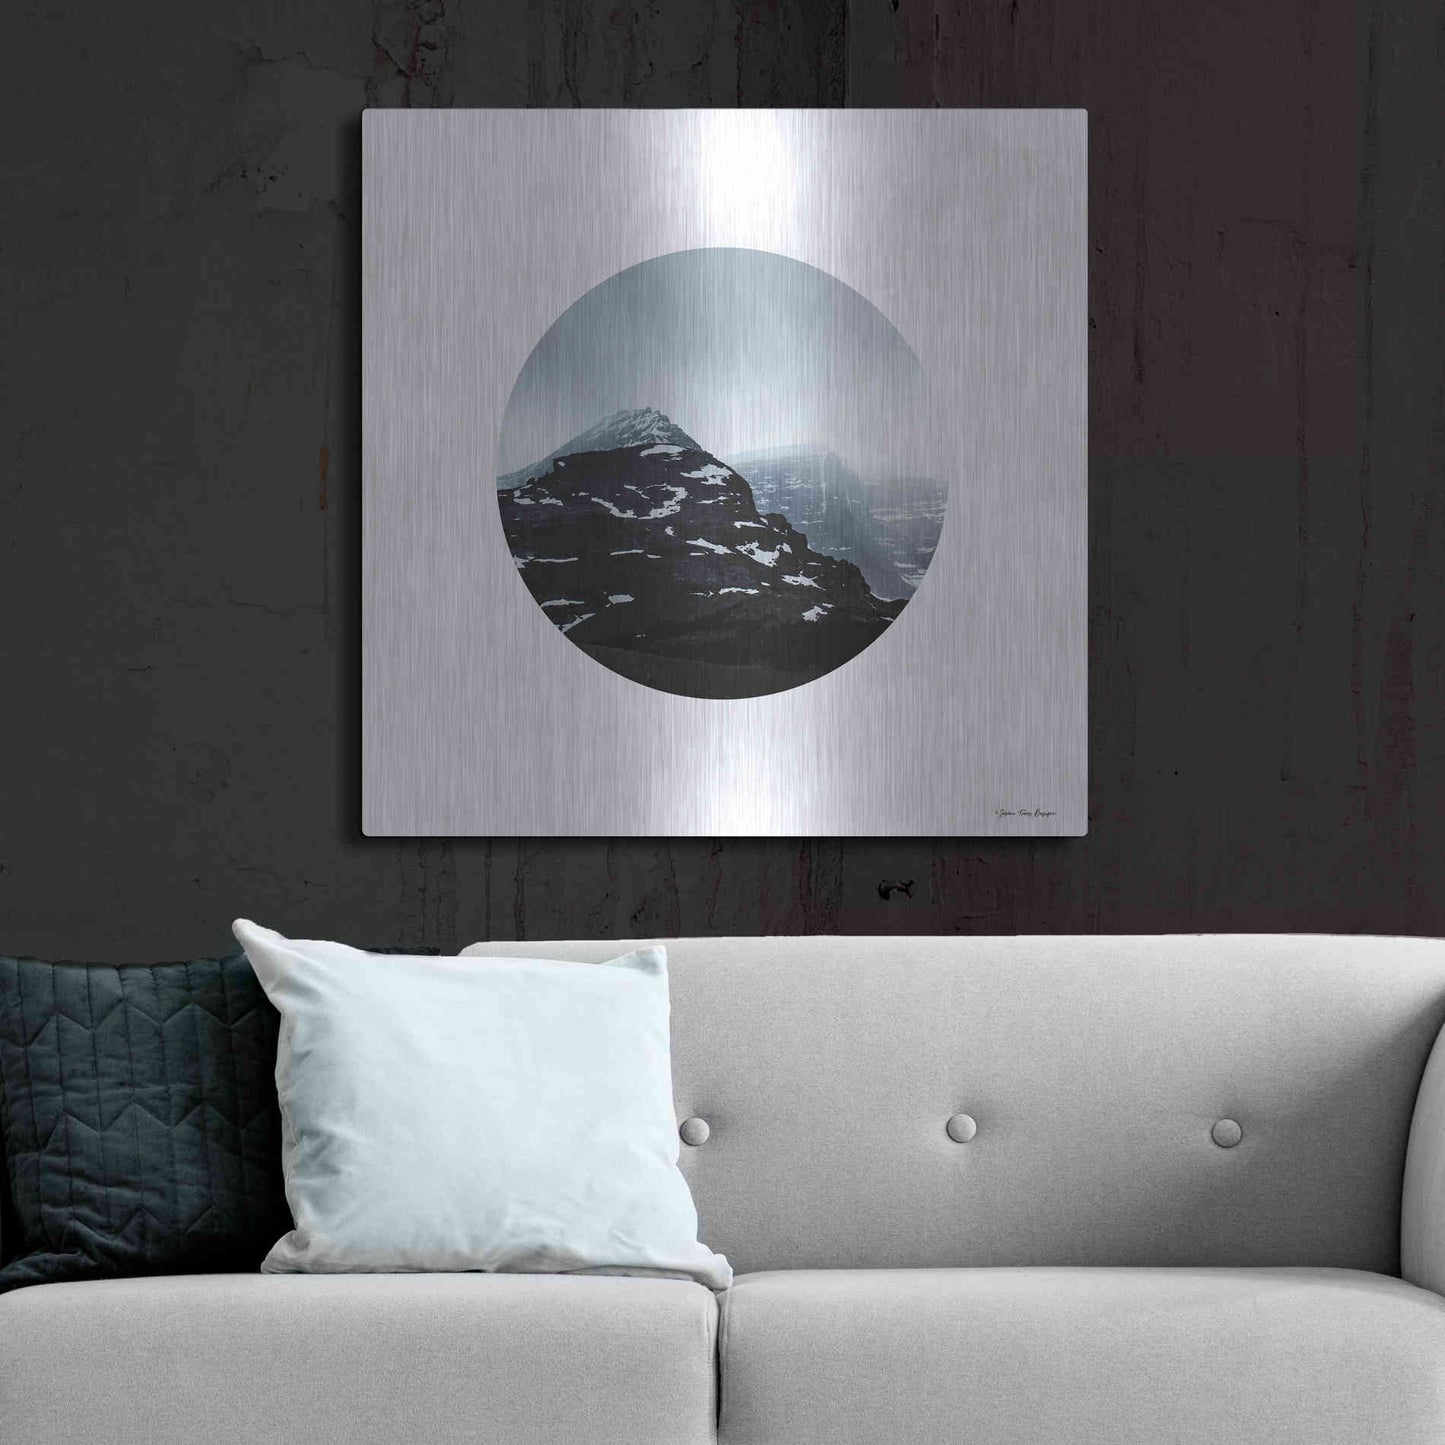 Luxe Metal Art 'Snow Mountains' by Seven Trees Design, Metal Wall Art,36x36